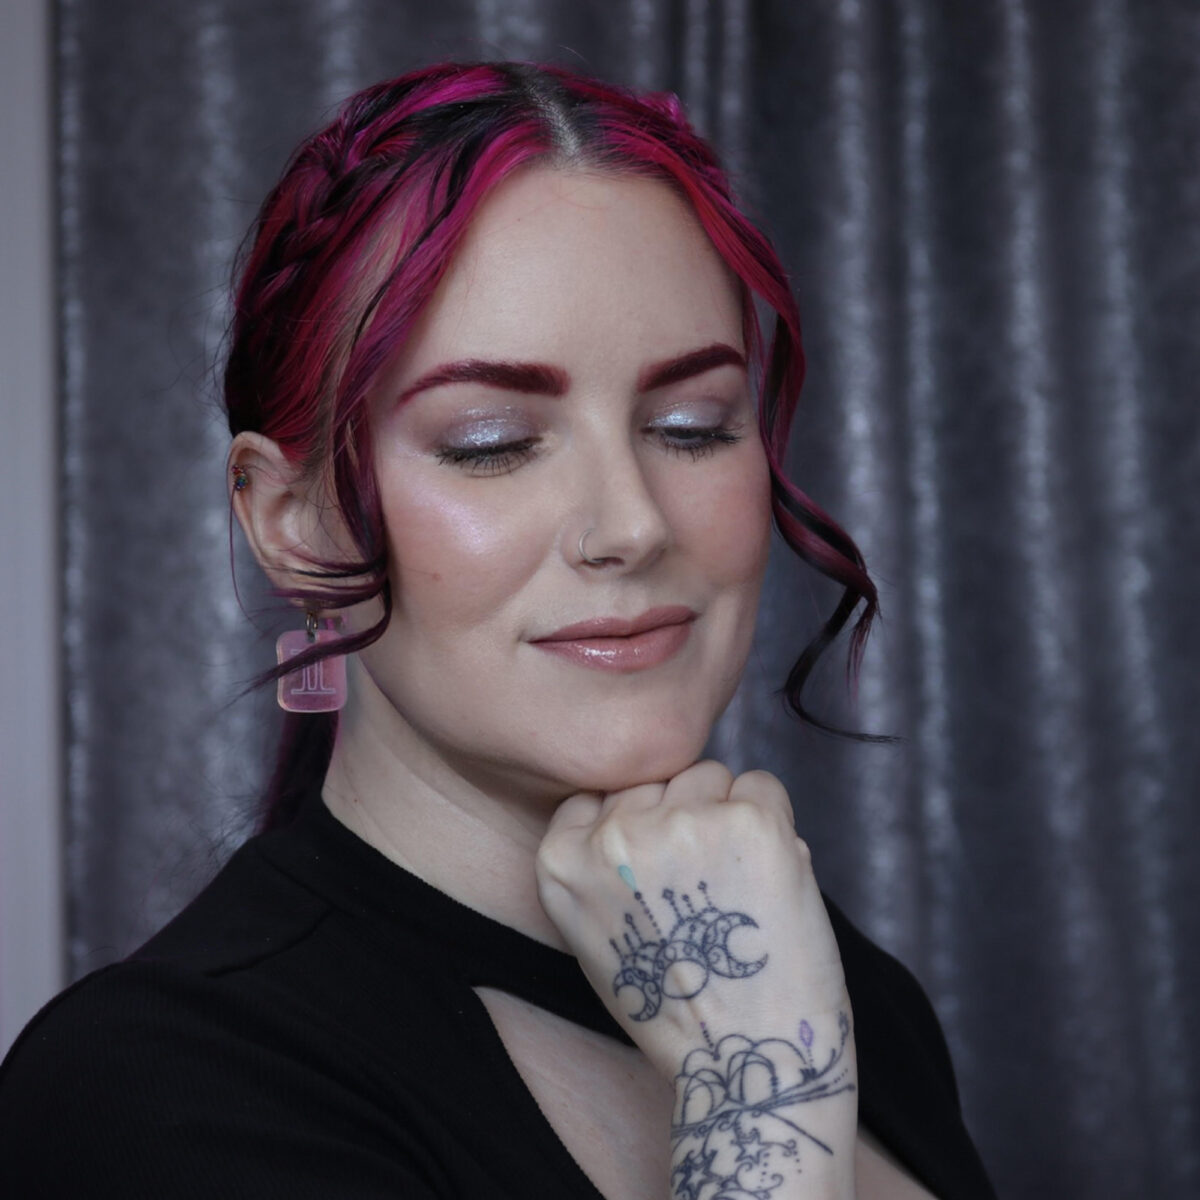 Cordelia is wearing LA Girl Instant Finish Multi-Use Tinted Primer in Light